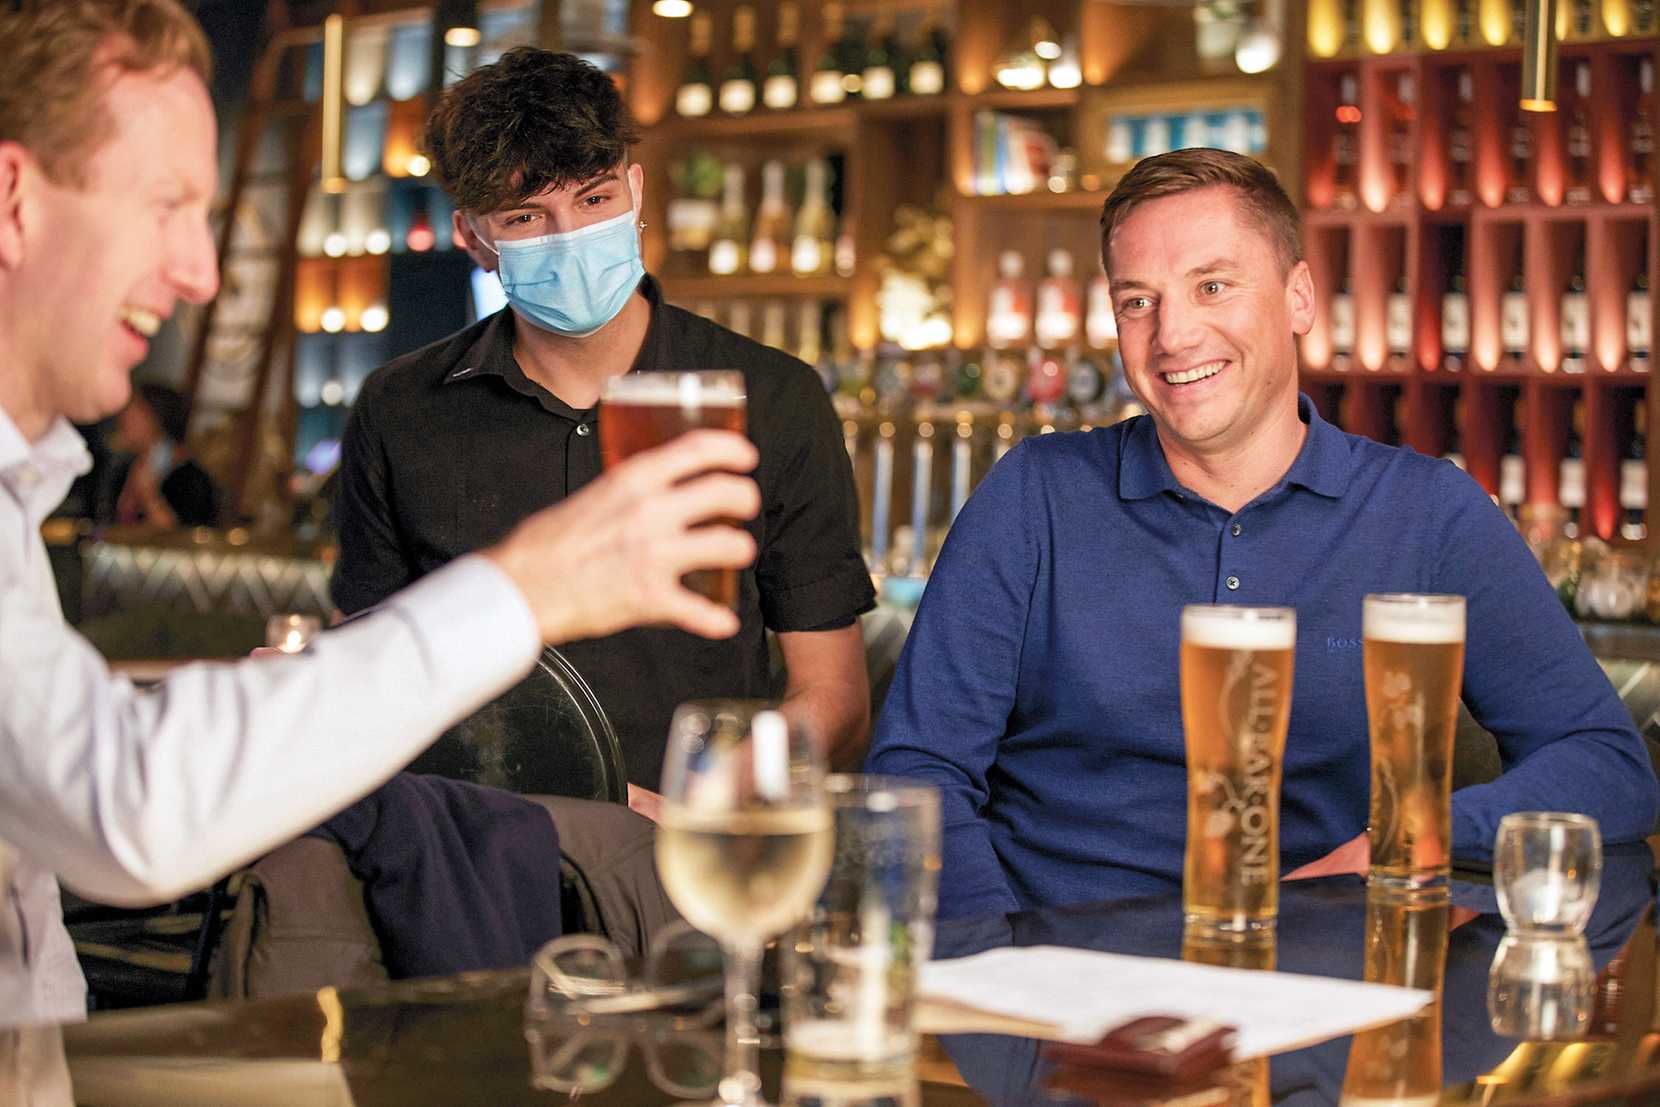 Two men are catching up over several pints while a masked team member watches.